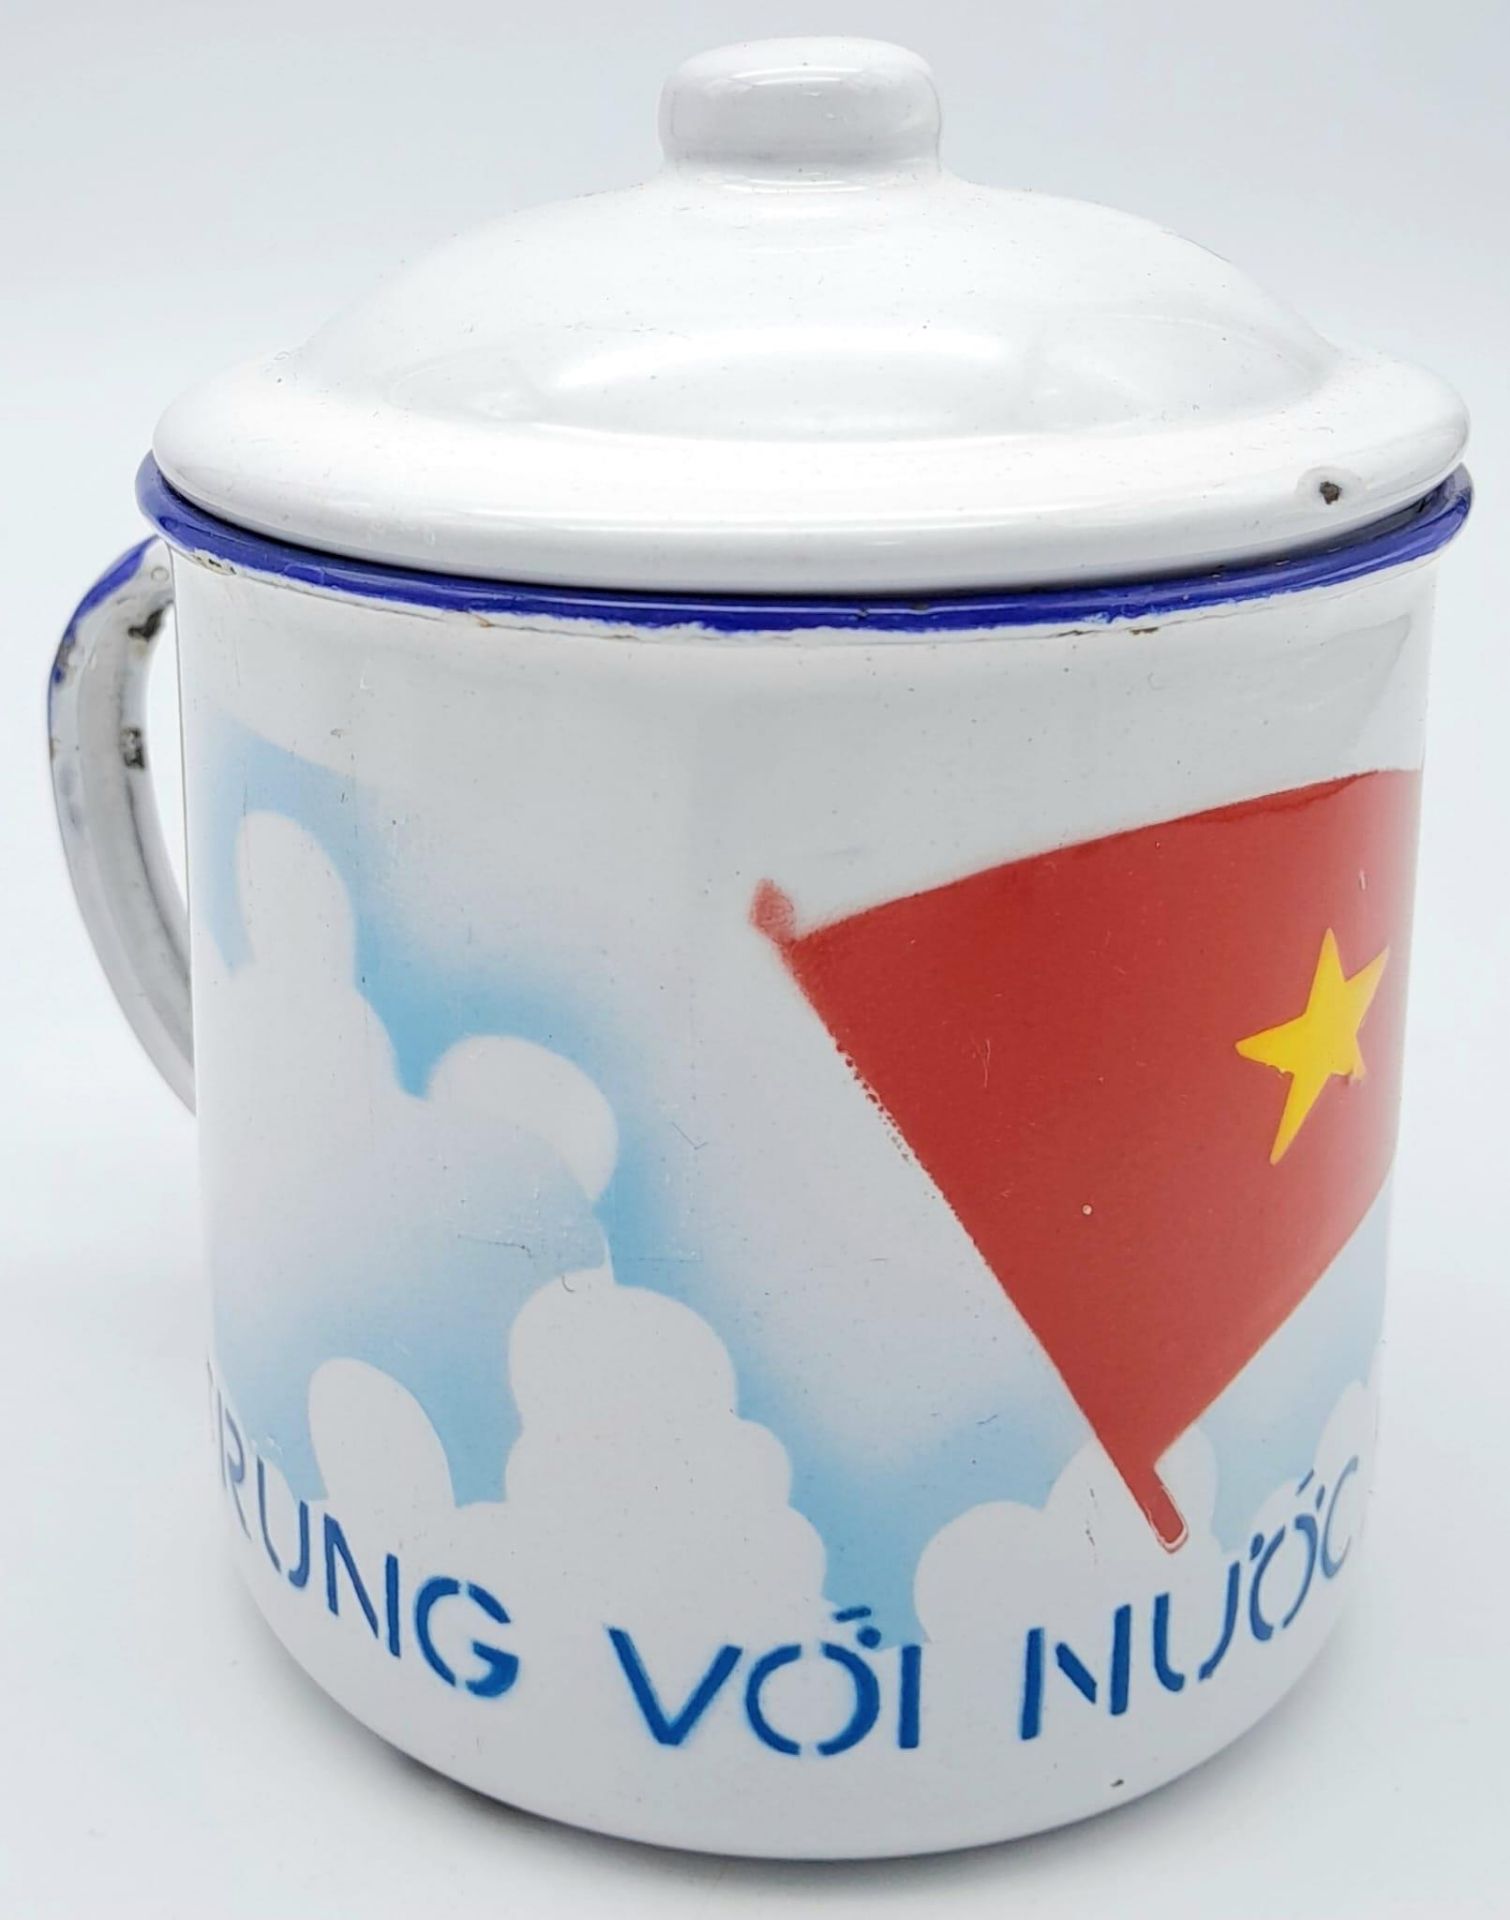 Vietnam War Era North Vietnamese Enamel Rice Cup. “Serving the Country & the People”